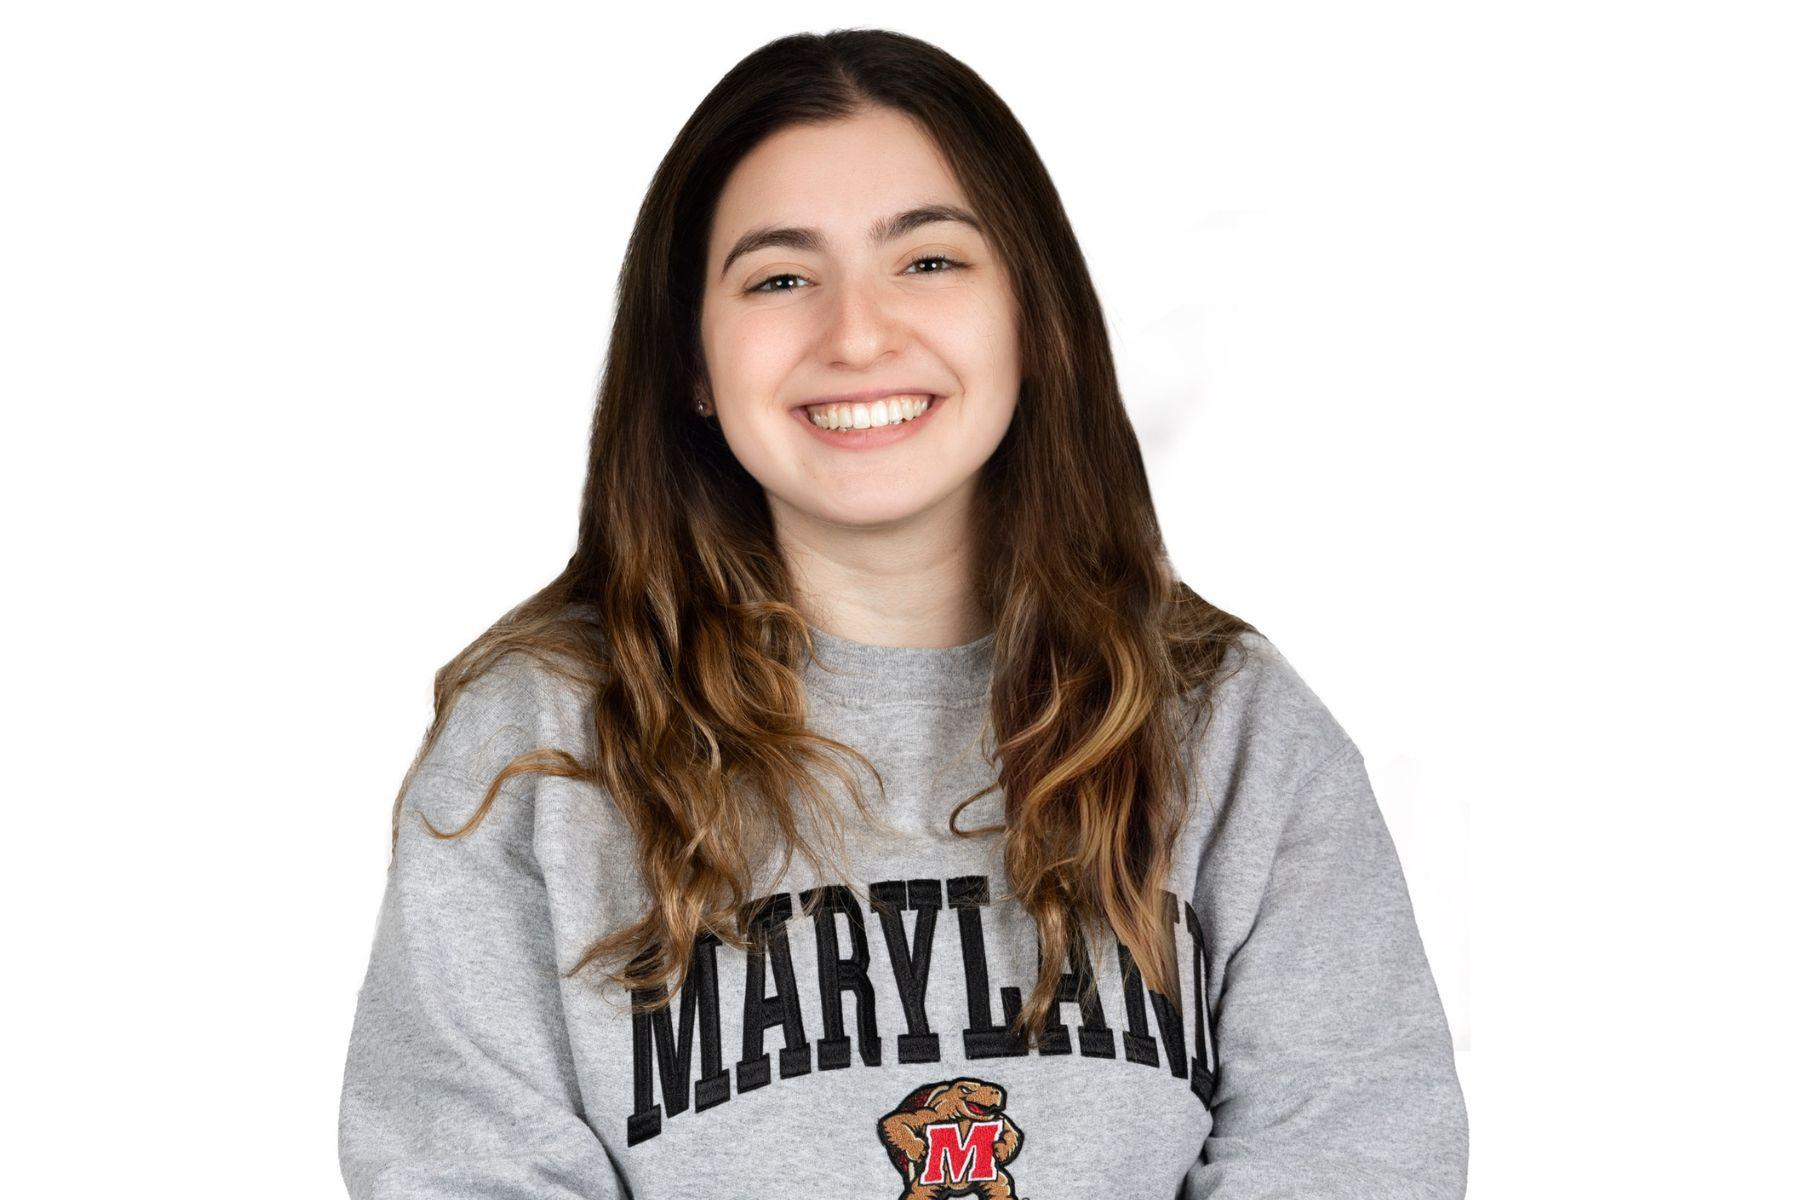 Julia is wearing a gray Maryland sweatshirt and is smiling at the camera